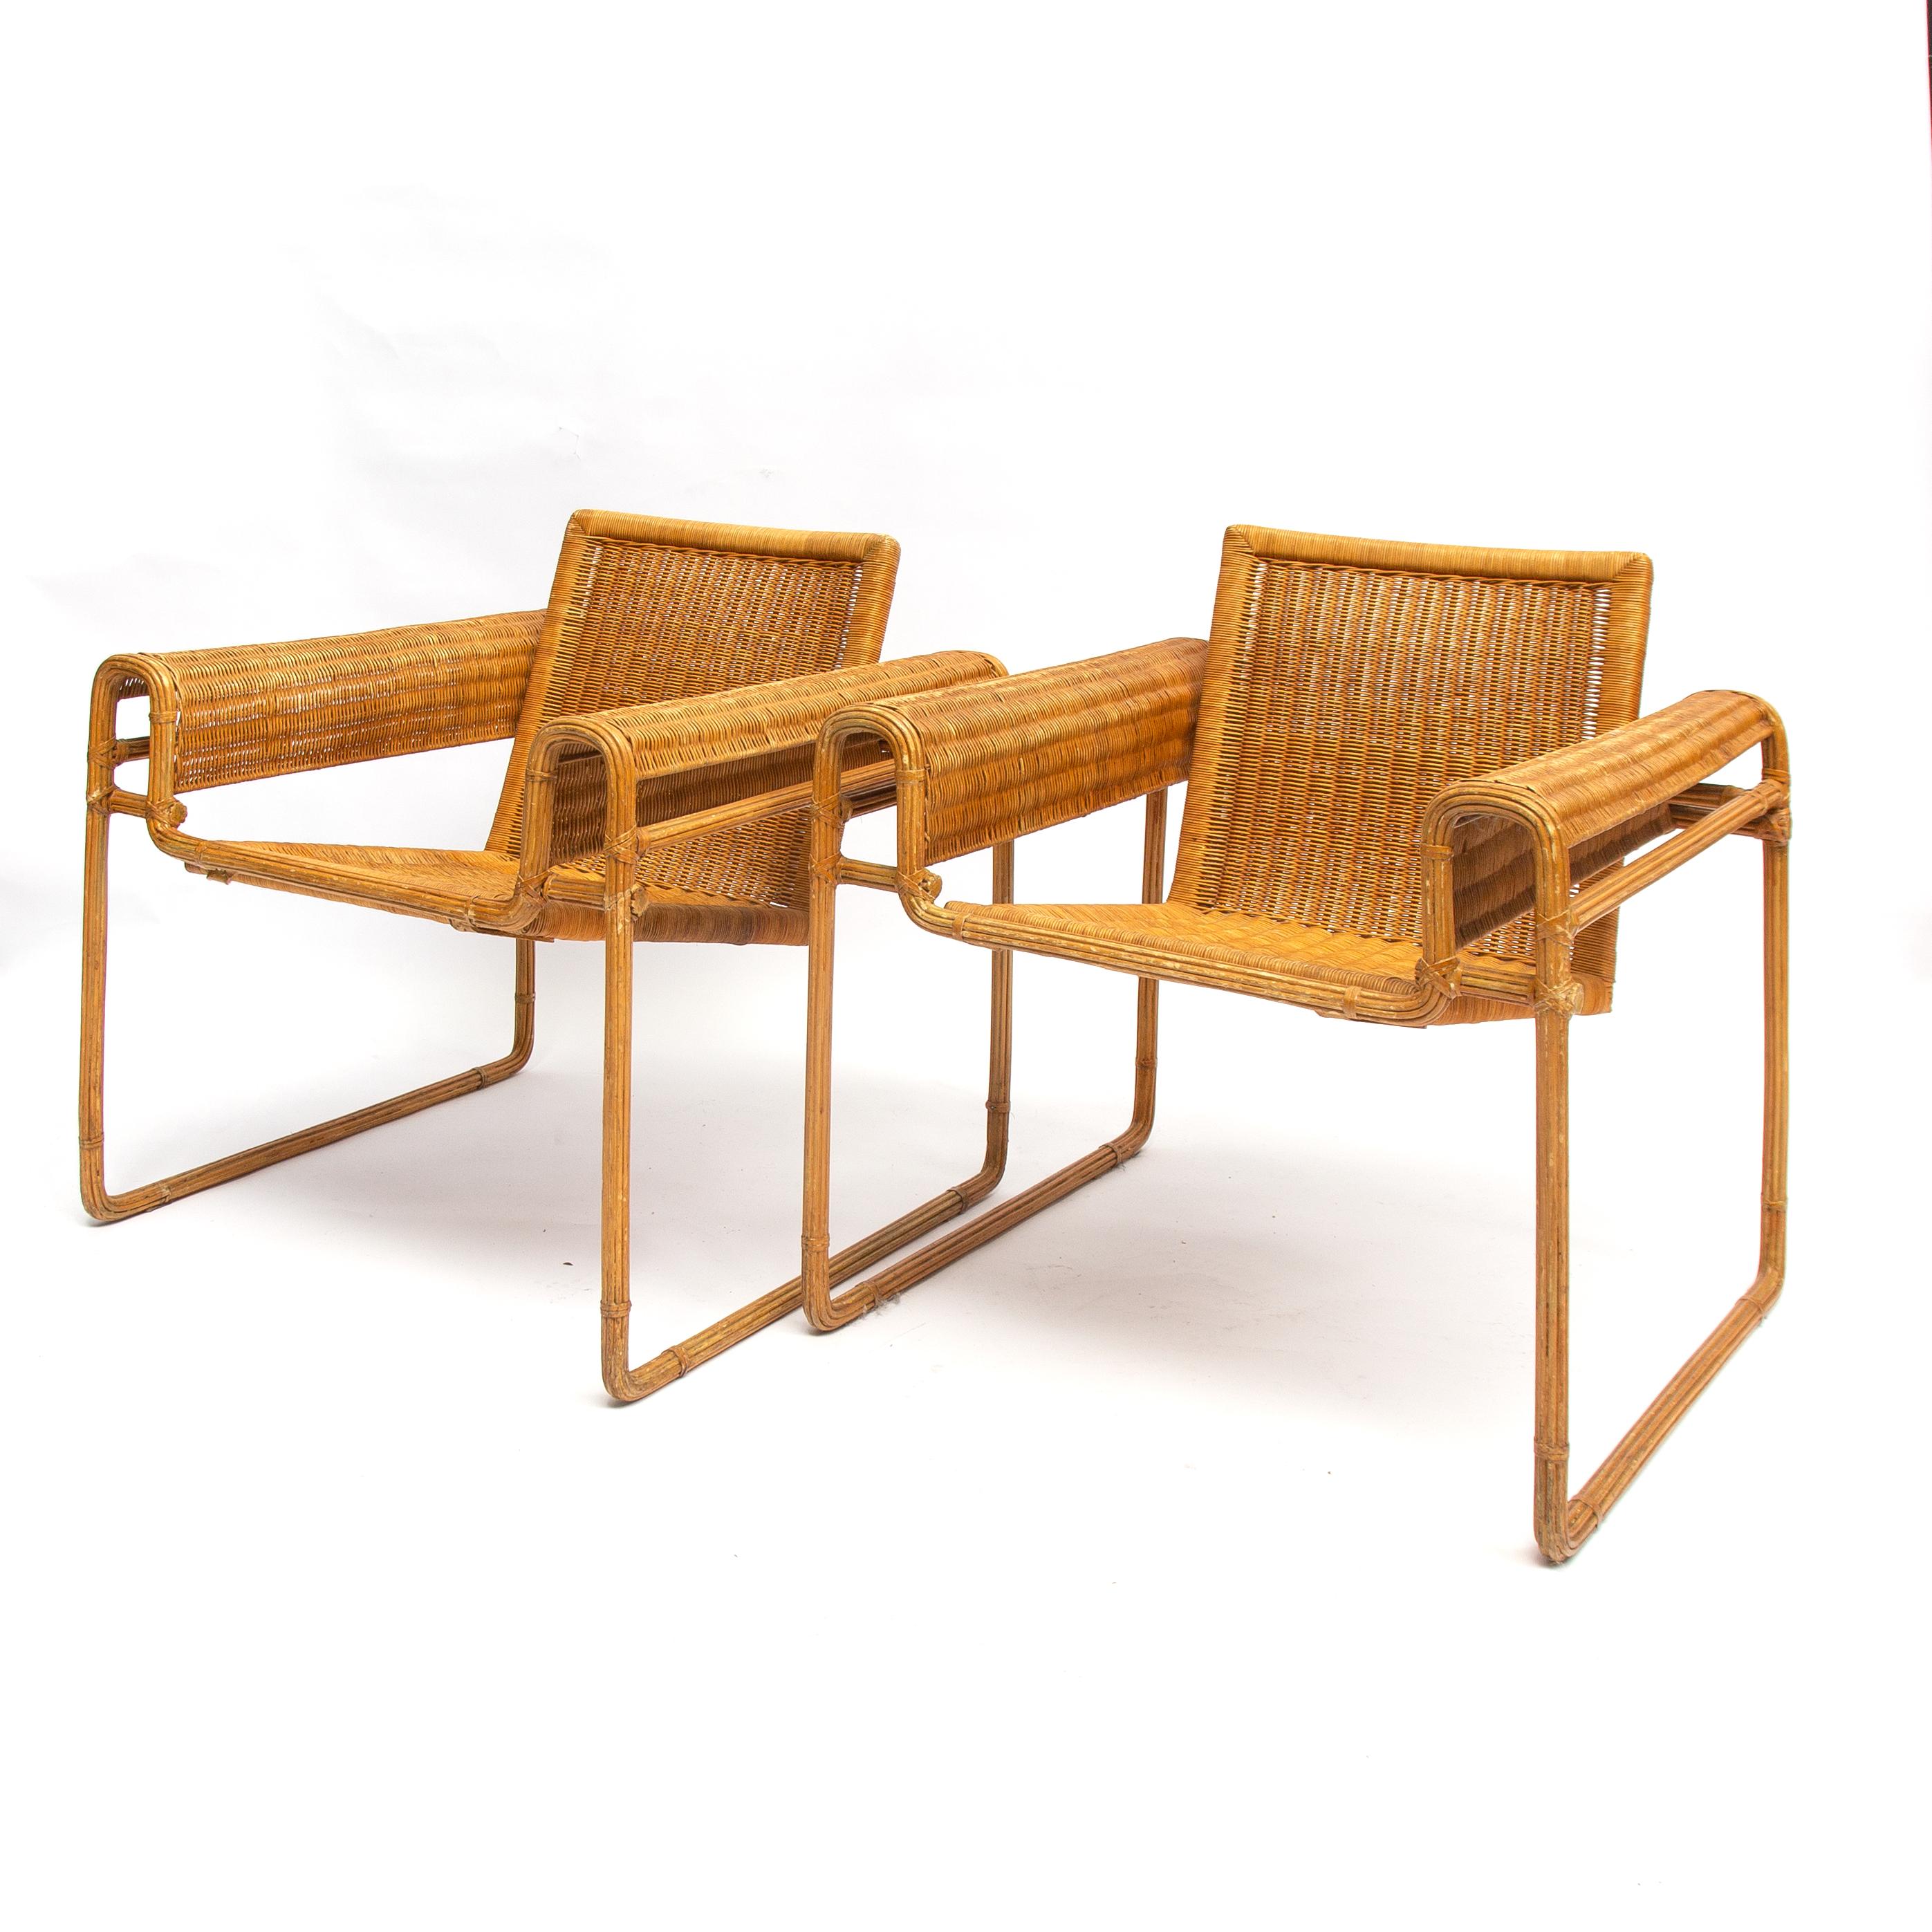 French Wicker Chair, Inspired by Marcel Breuer's Wassily Chair, 1970s For Sale